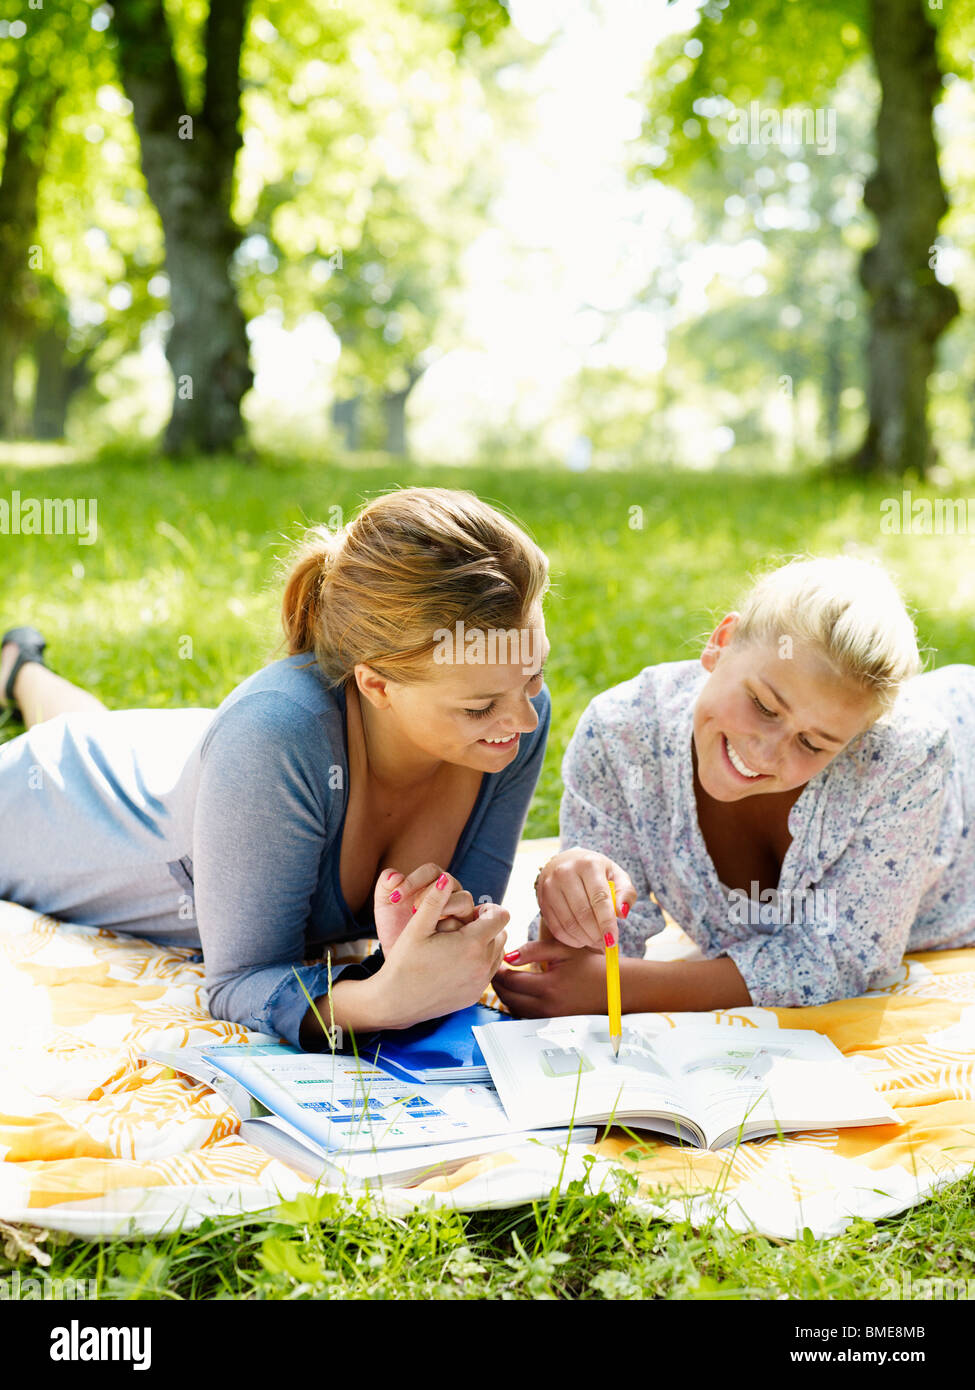 Women lying on blanket and learning Stock Photo